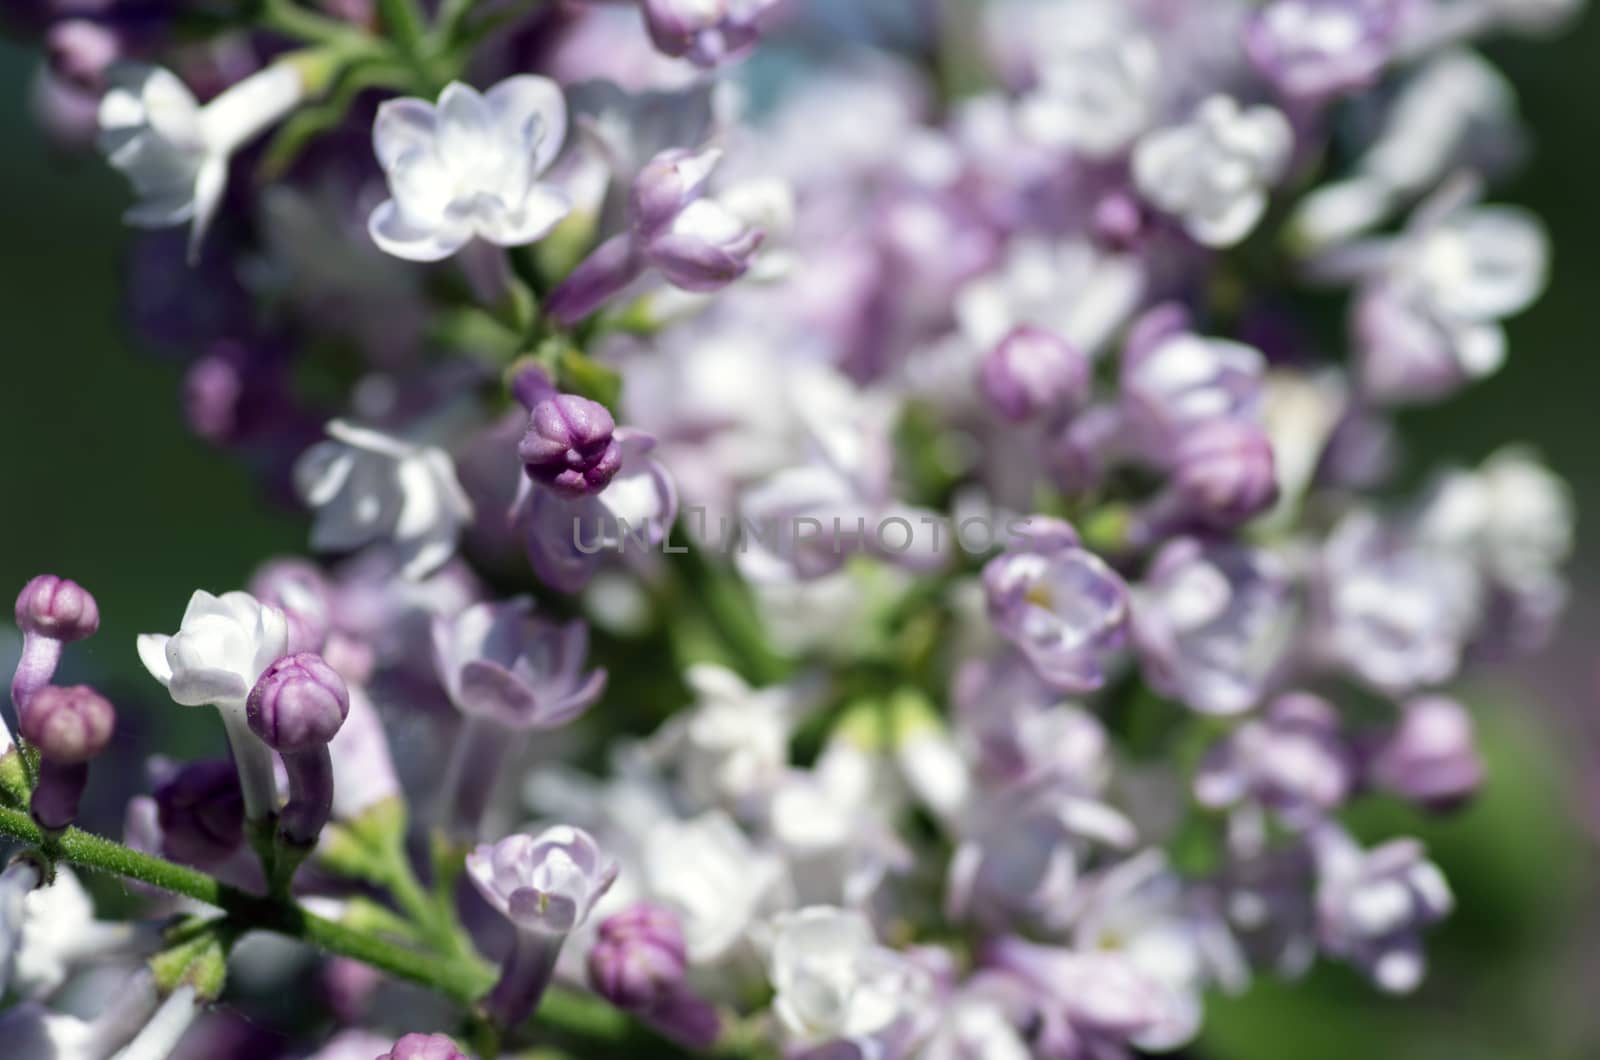 Blooming lilac flowers. Abstract background. Macro photo